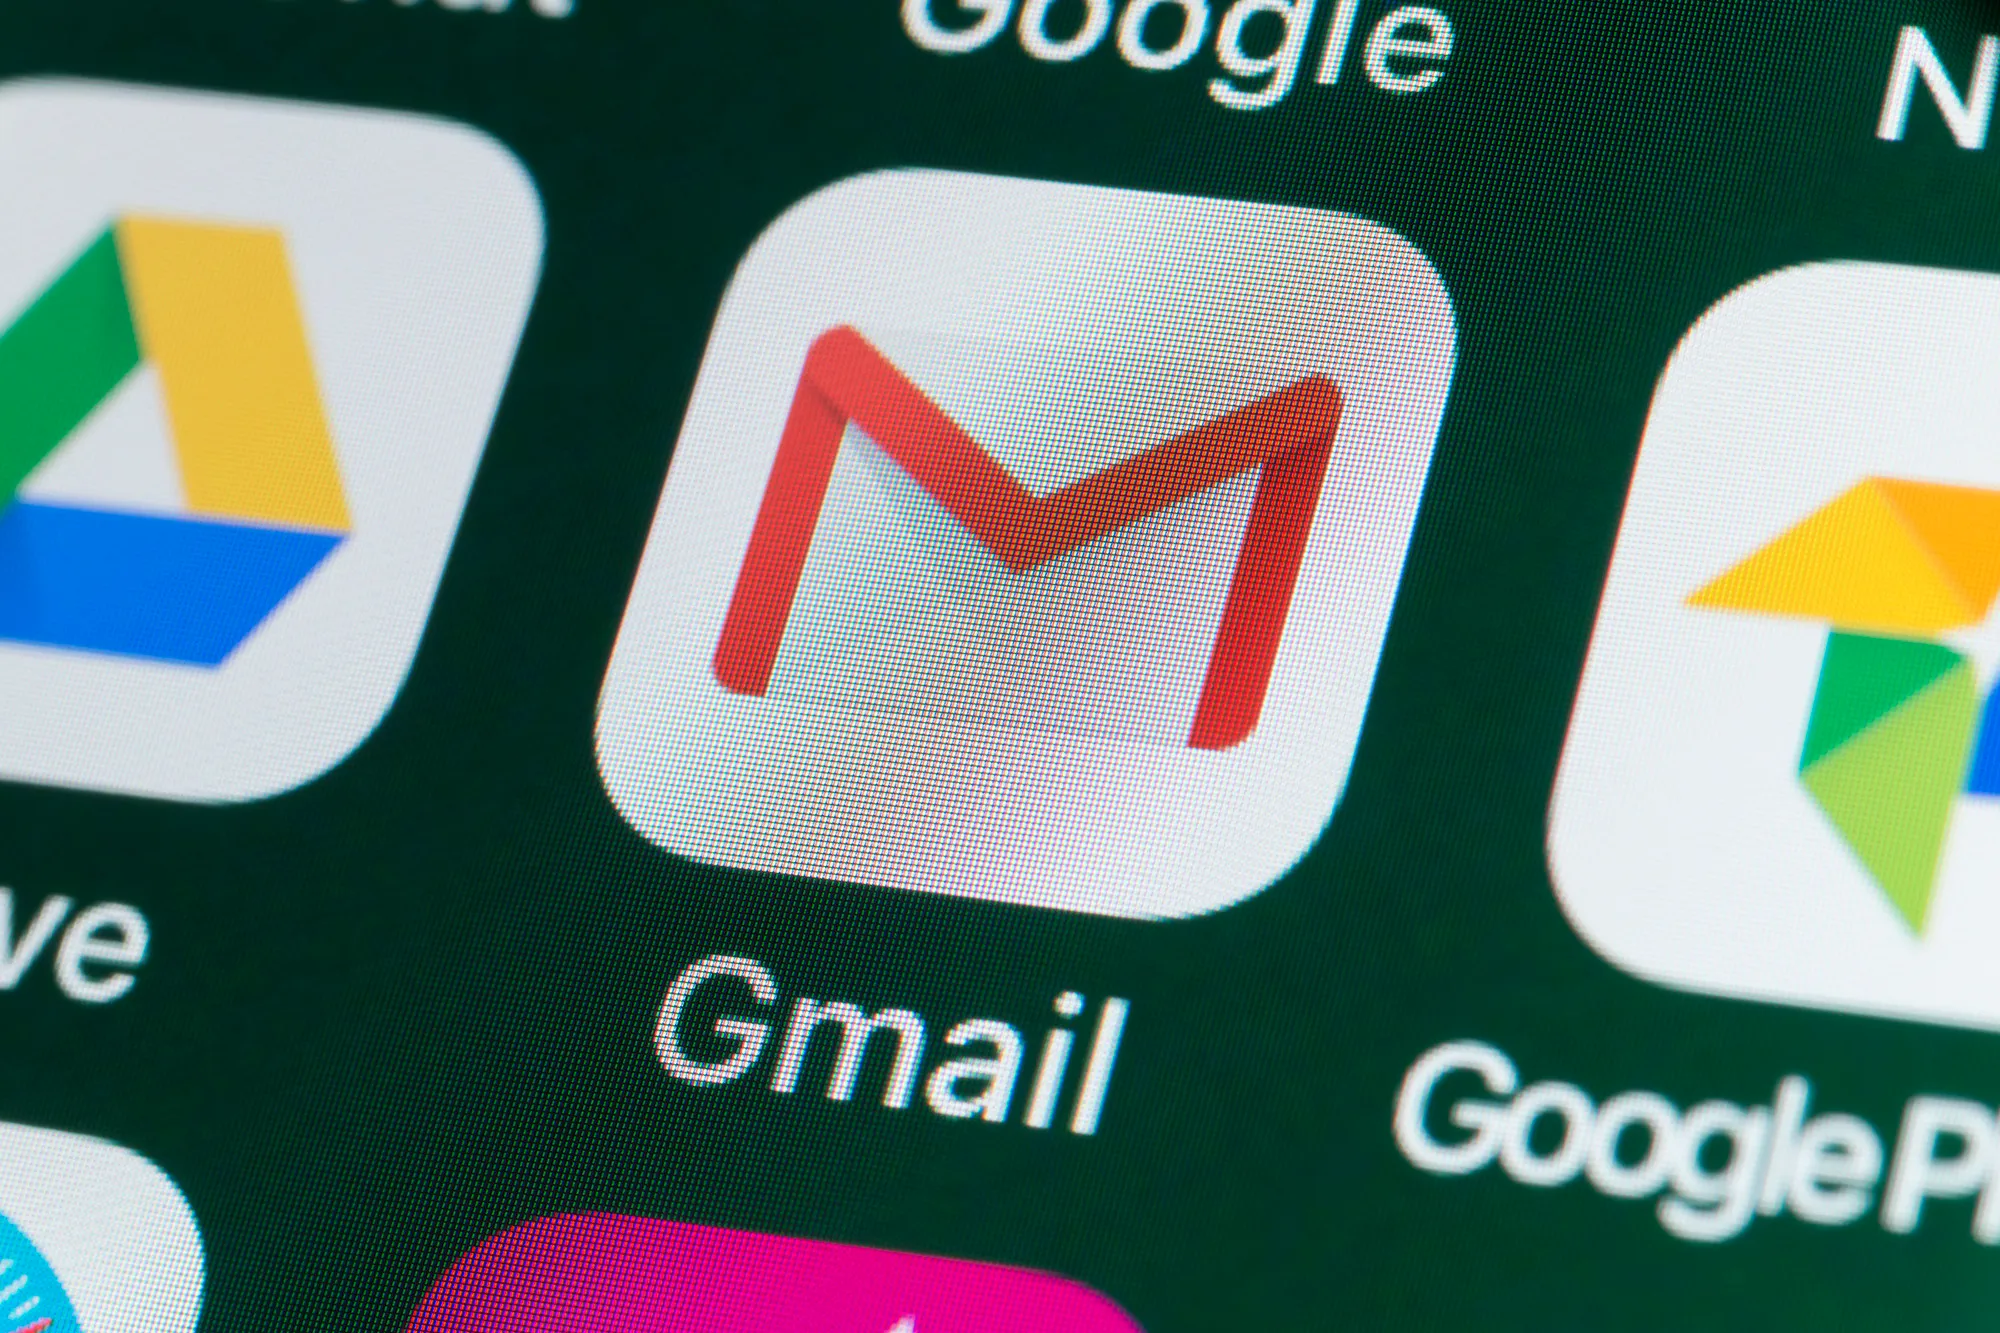 Google’s 2018 Gmail update featured image